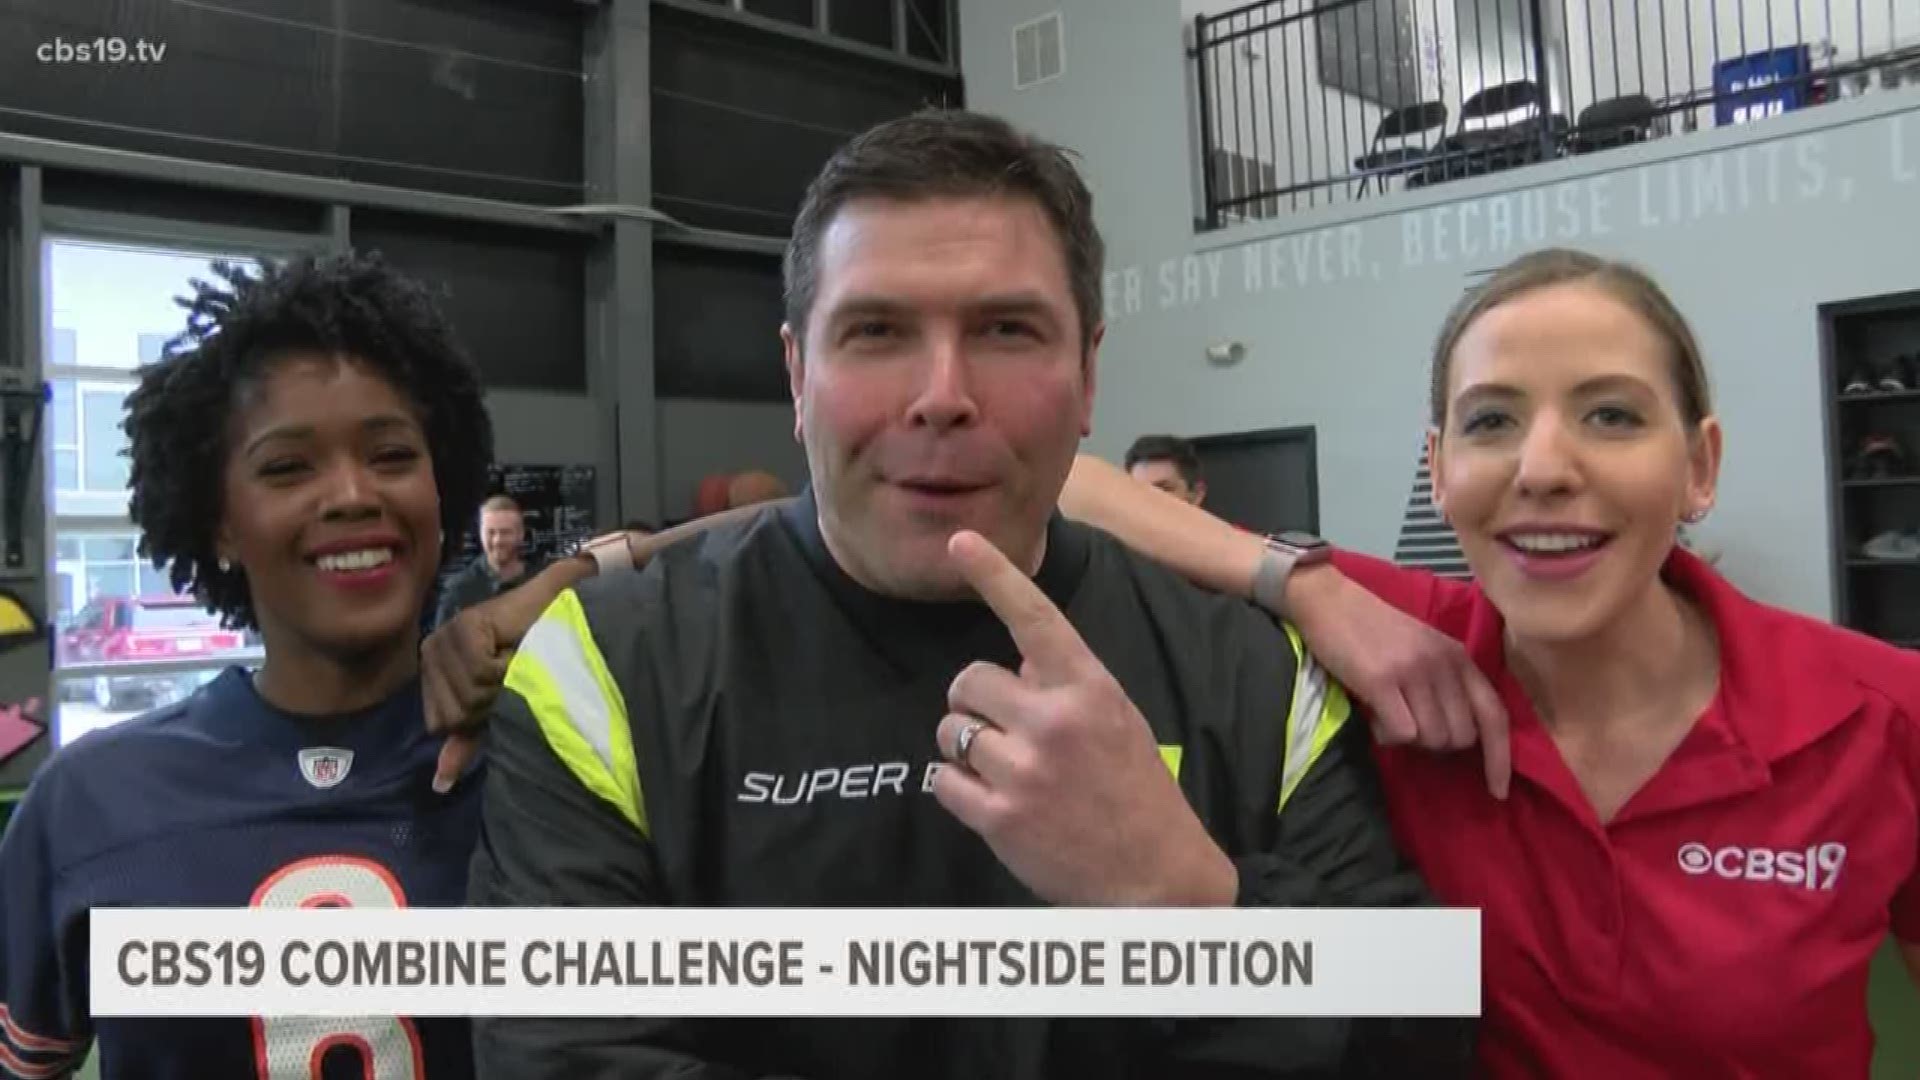 The evening crew faces the morning team in a combine challenge.